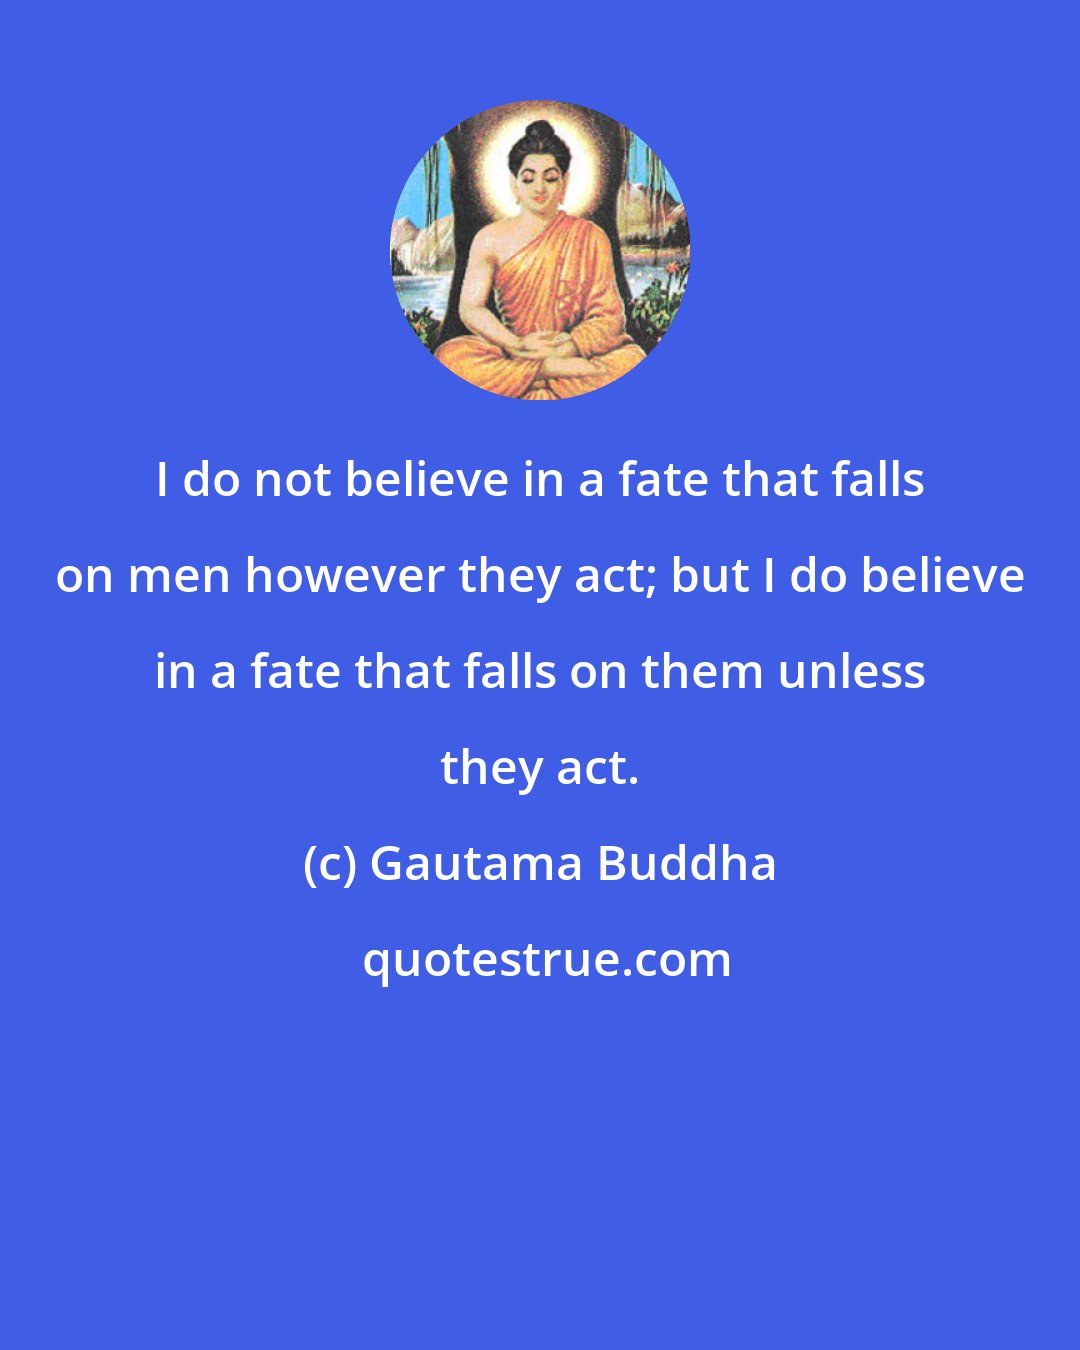 Gautama Buddha: I do not believe in a fate that falls on men however they act; but I do believe in a fate that falls on them unless they act.